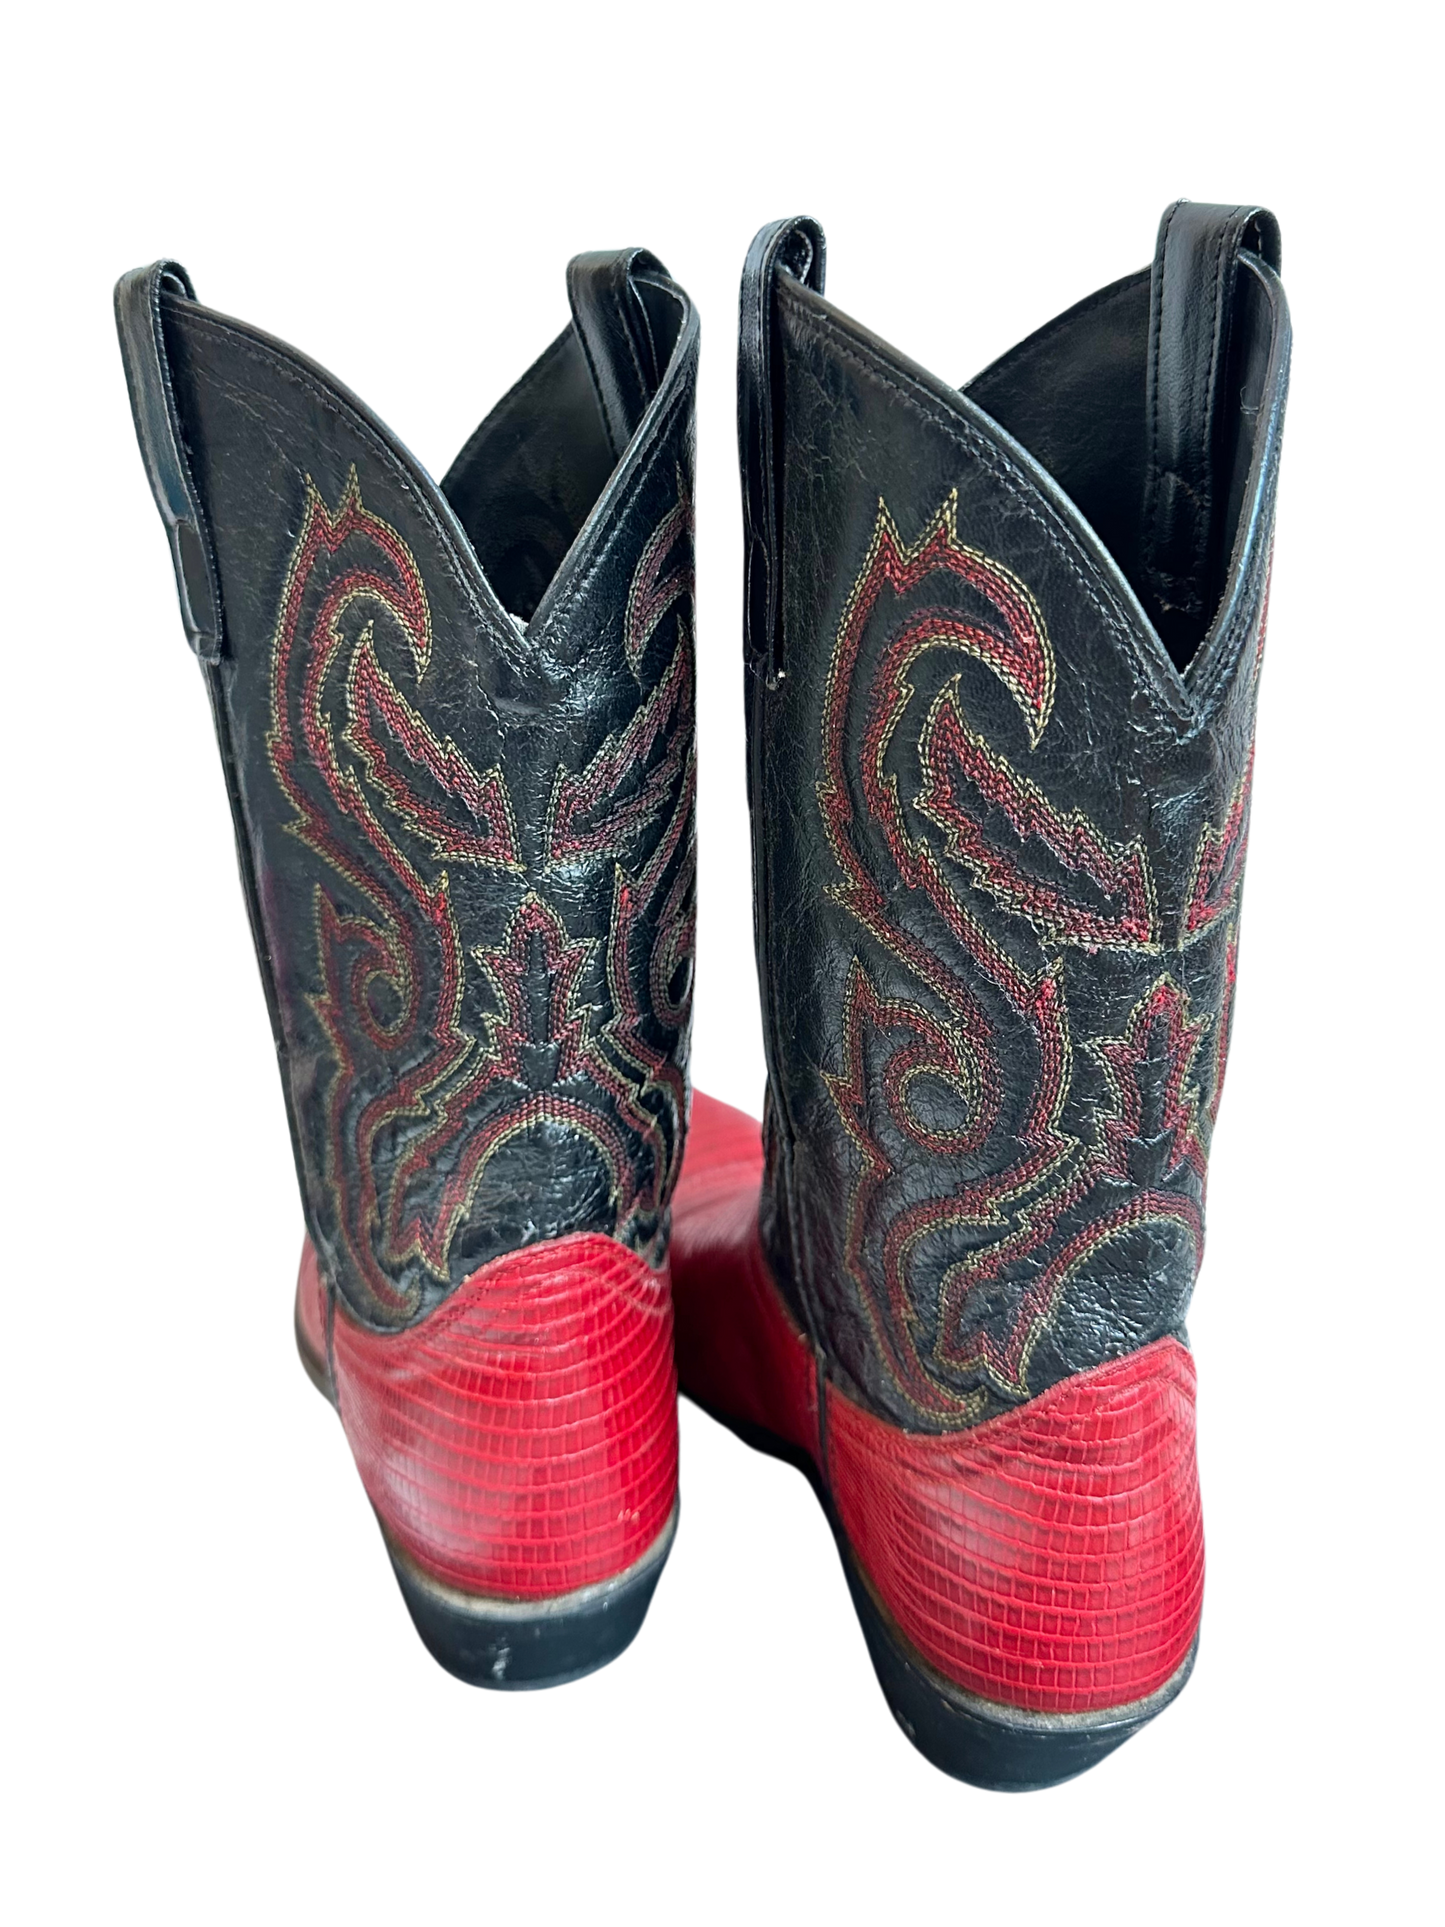 RED AND BLACK TWO TONE COWBOY BOOTS SIZE 7.5